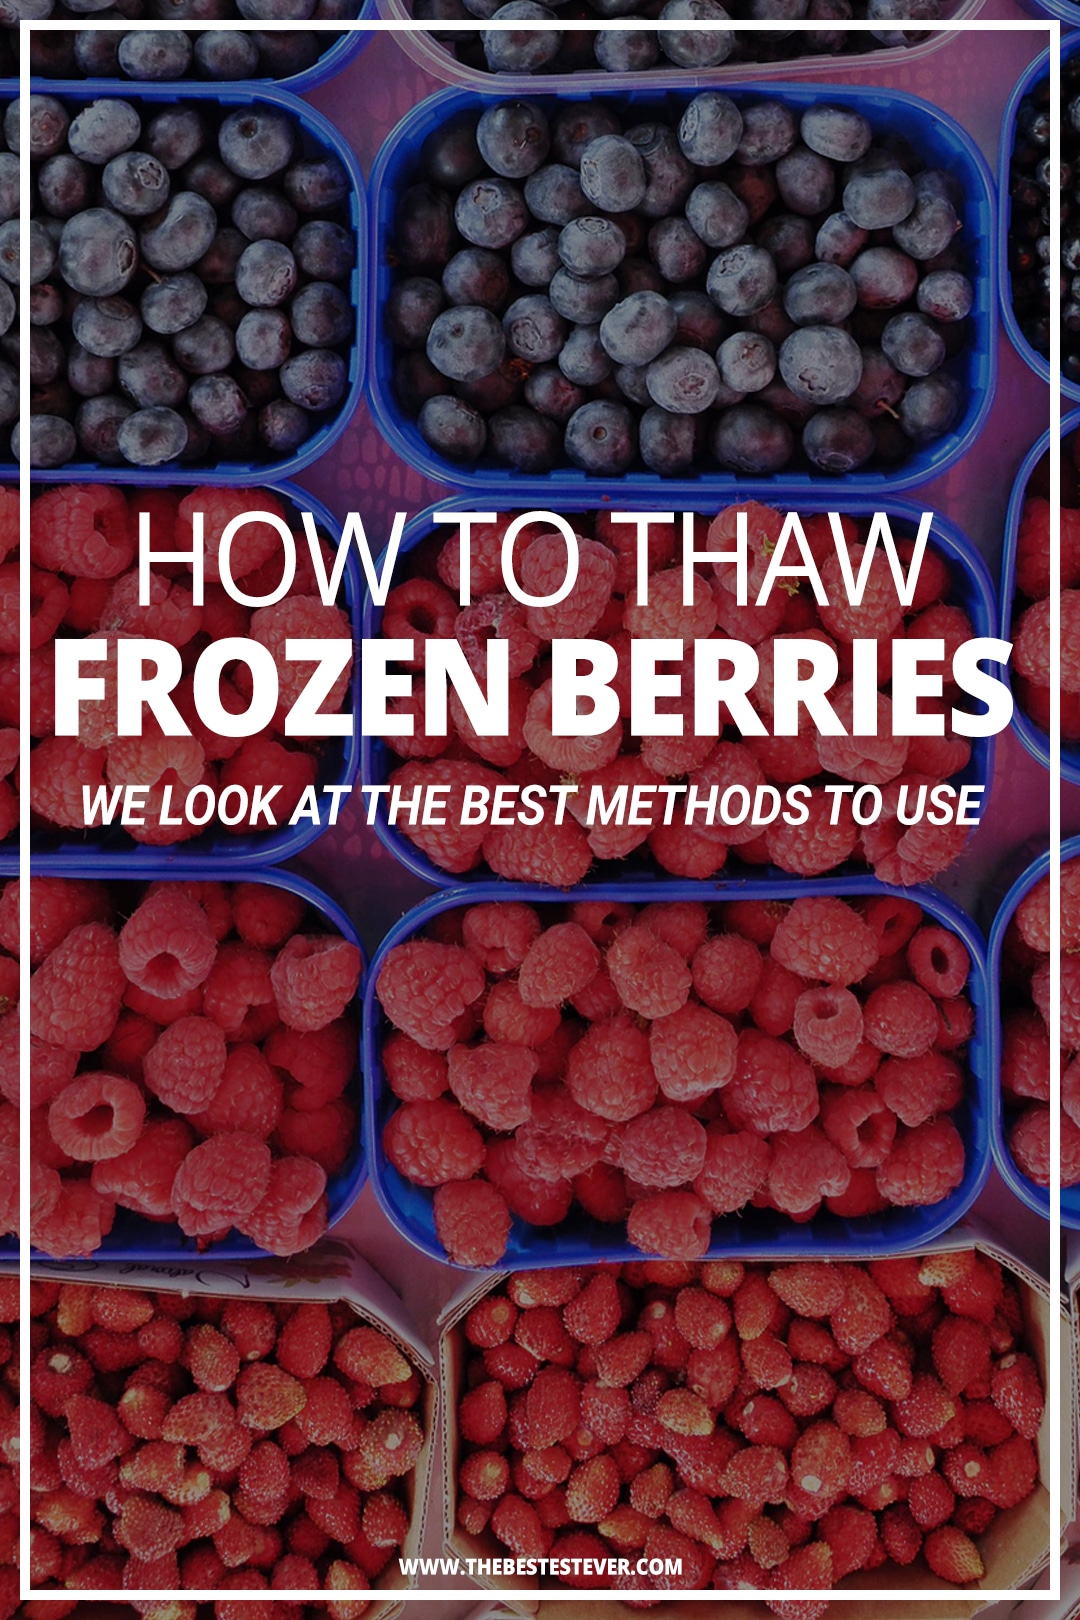 How to Thaw Frozen Berries: A Look at the Best Options